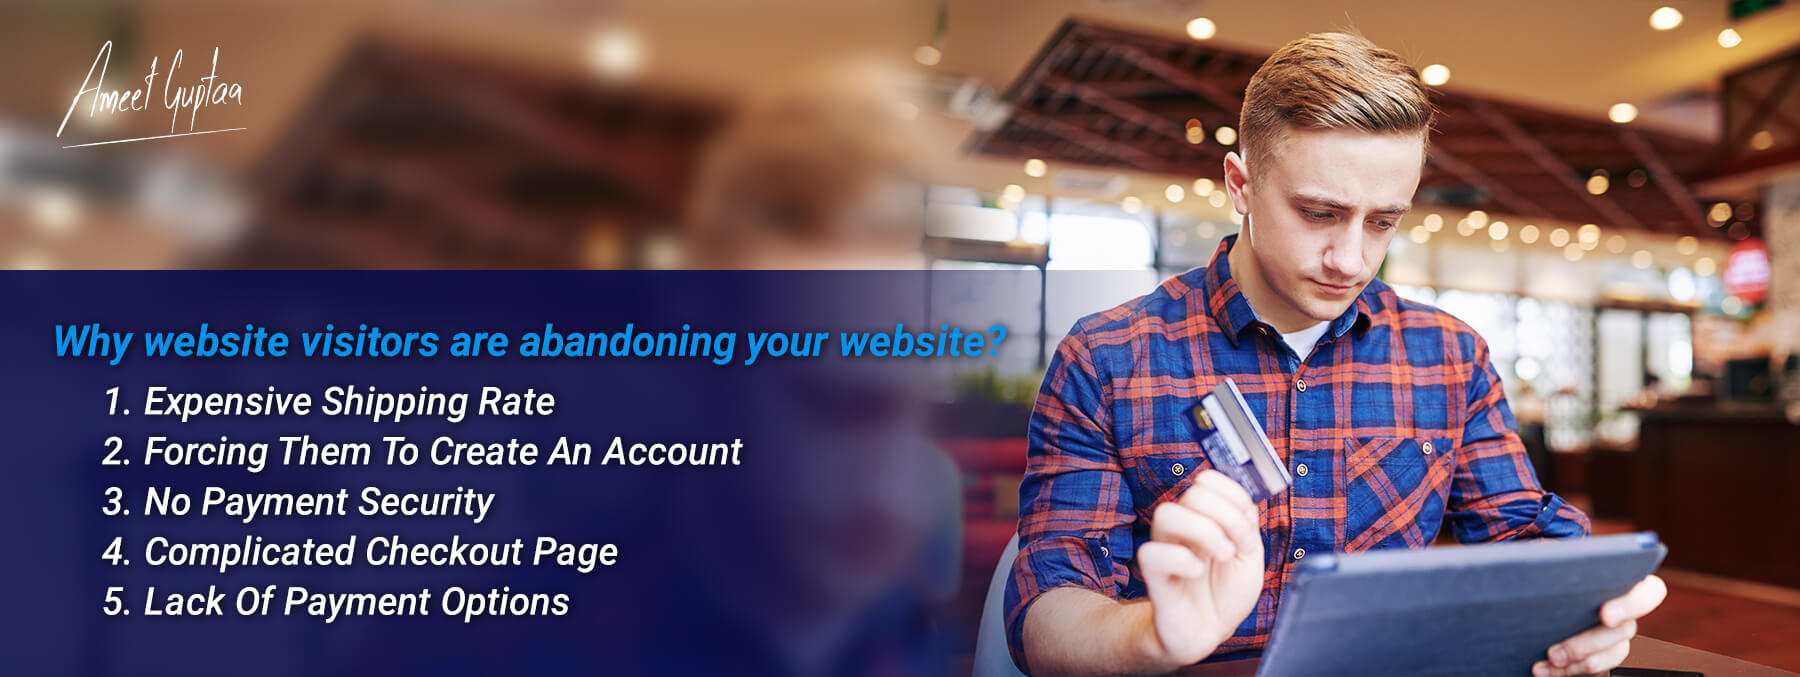 Top 5 Reasons Your Ecommerce Website Visitor Are Abandoning Orders